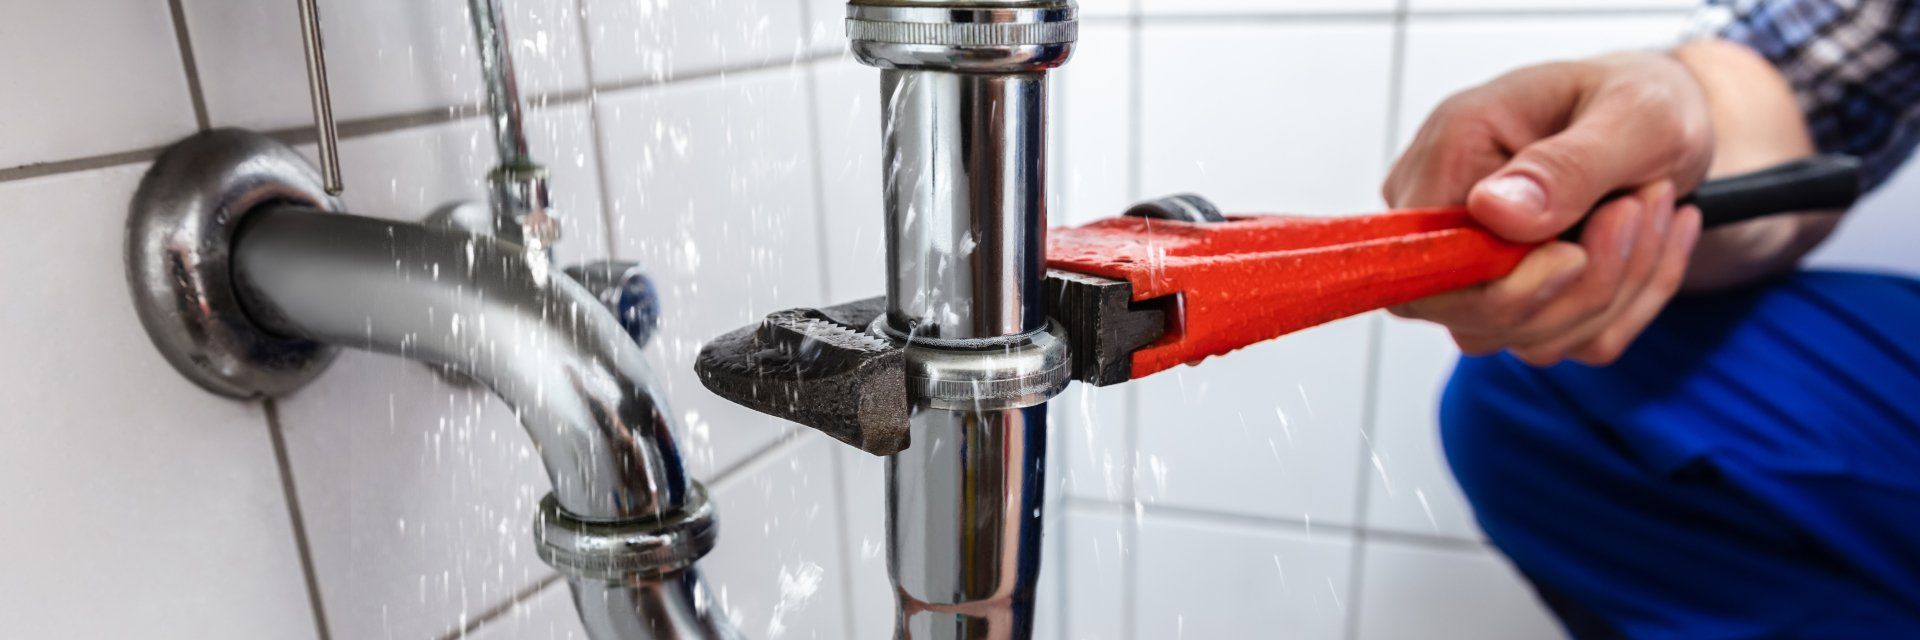 General Plumbing Services in Rutherford County, TN